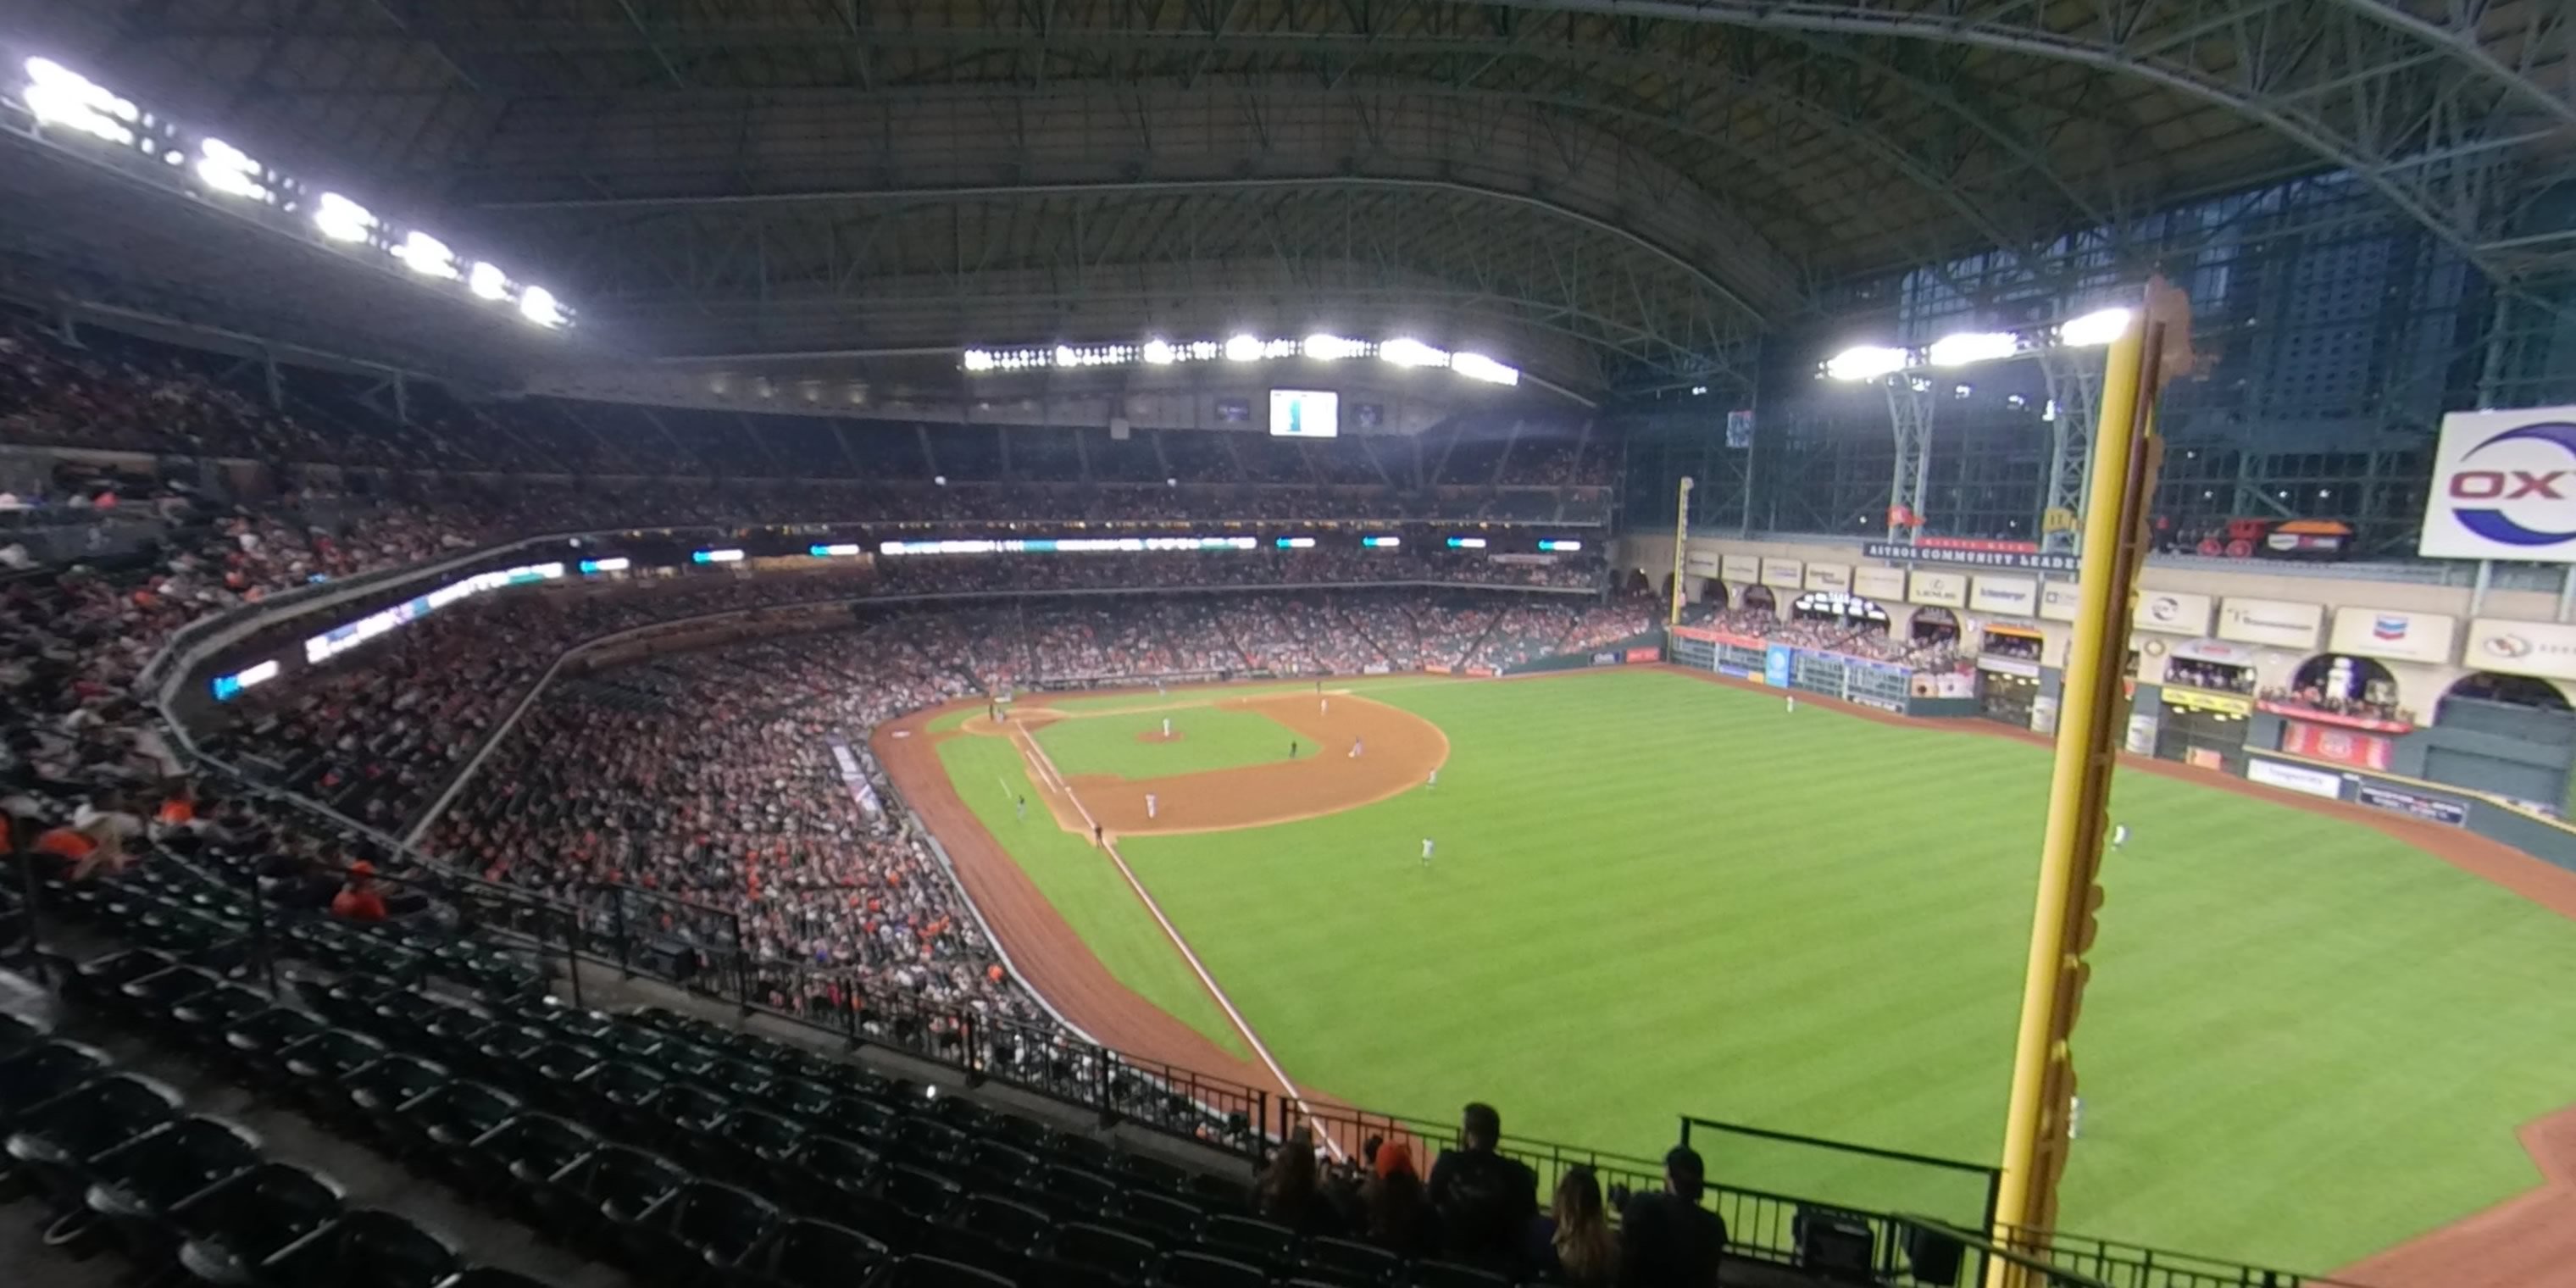 section 334 panoramic seat view  for baseball - minute maid park